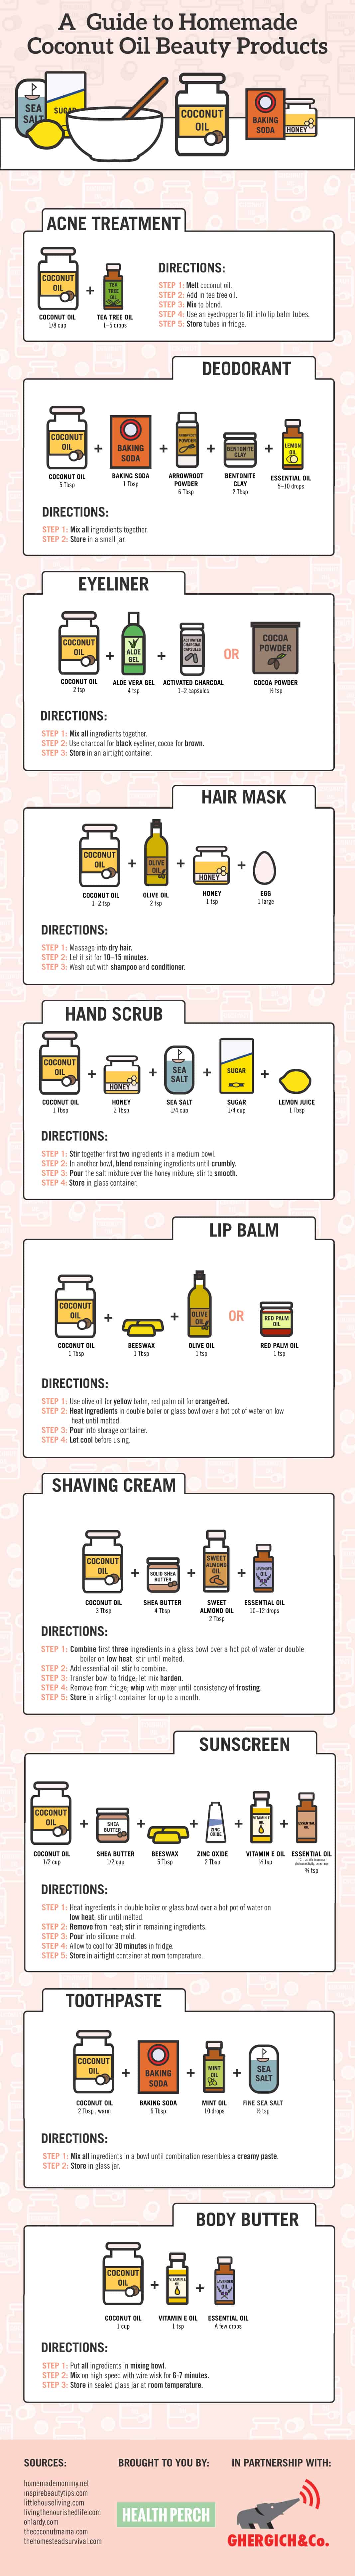 10 Recipes for Homemade Coconut Oil Beauty Products - Make Your Own Coconut Oil Beauty Products